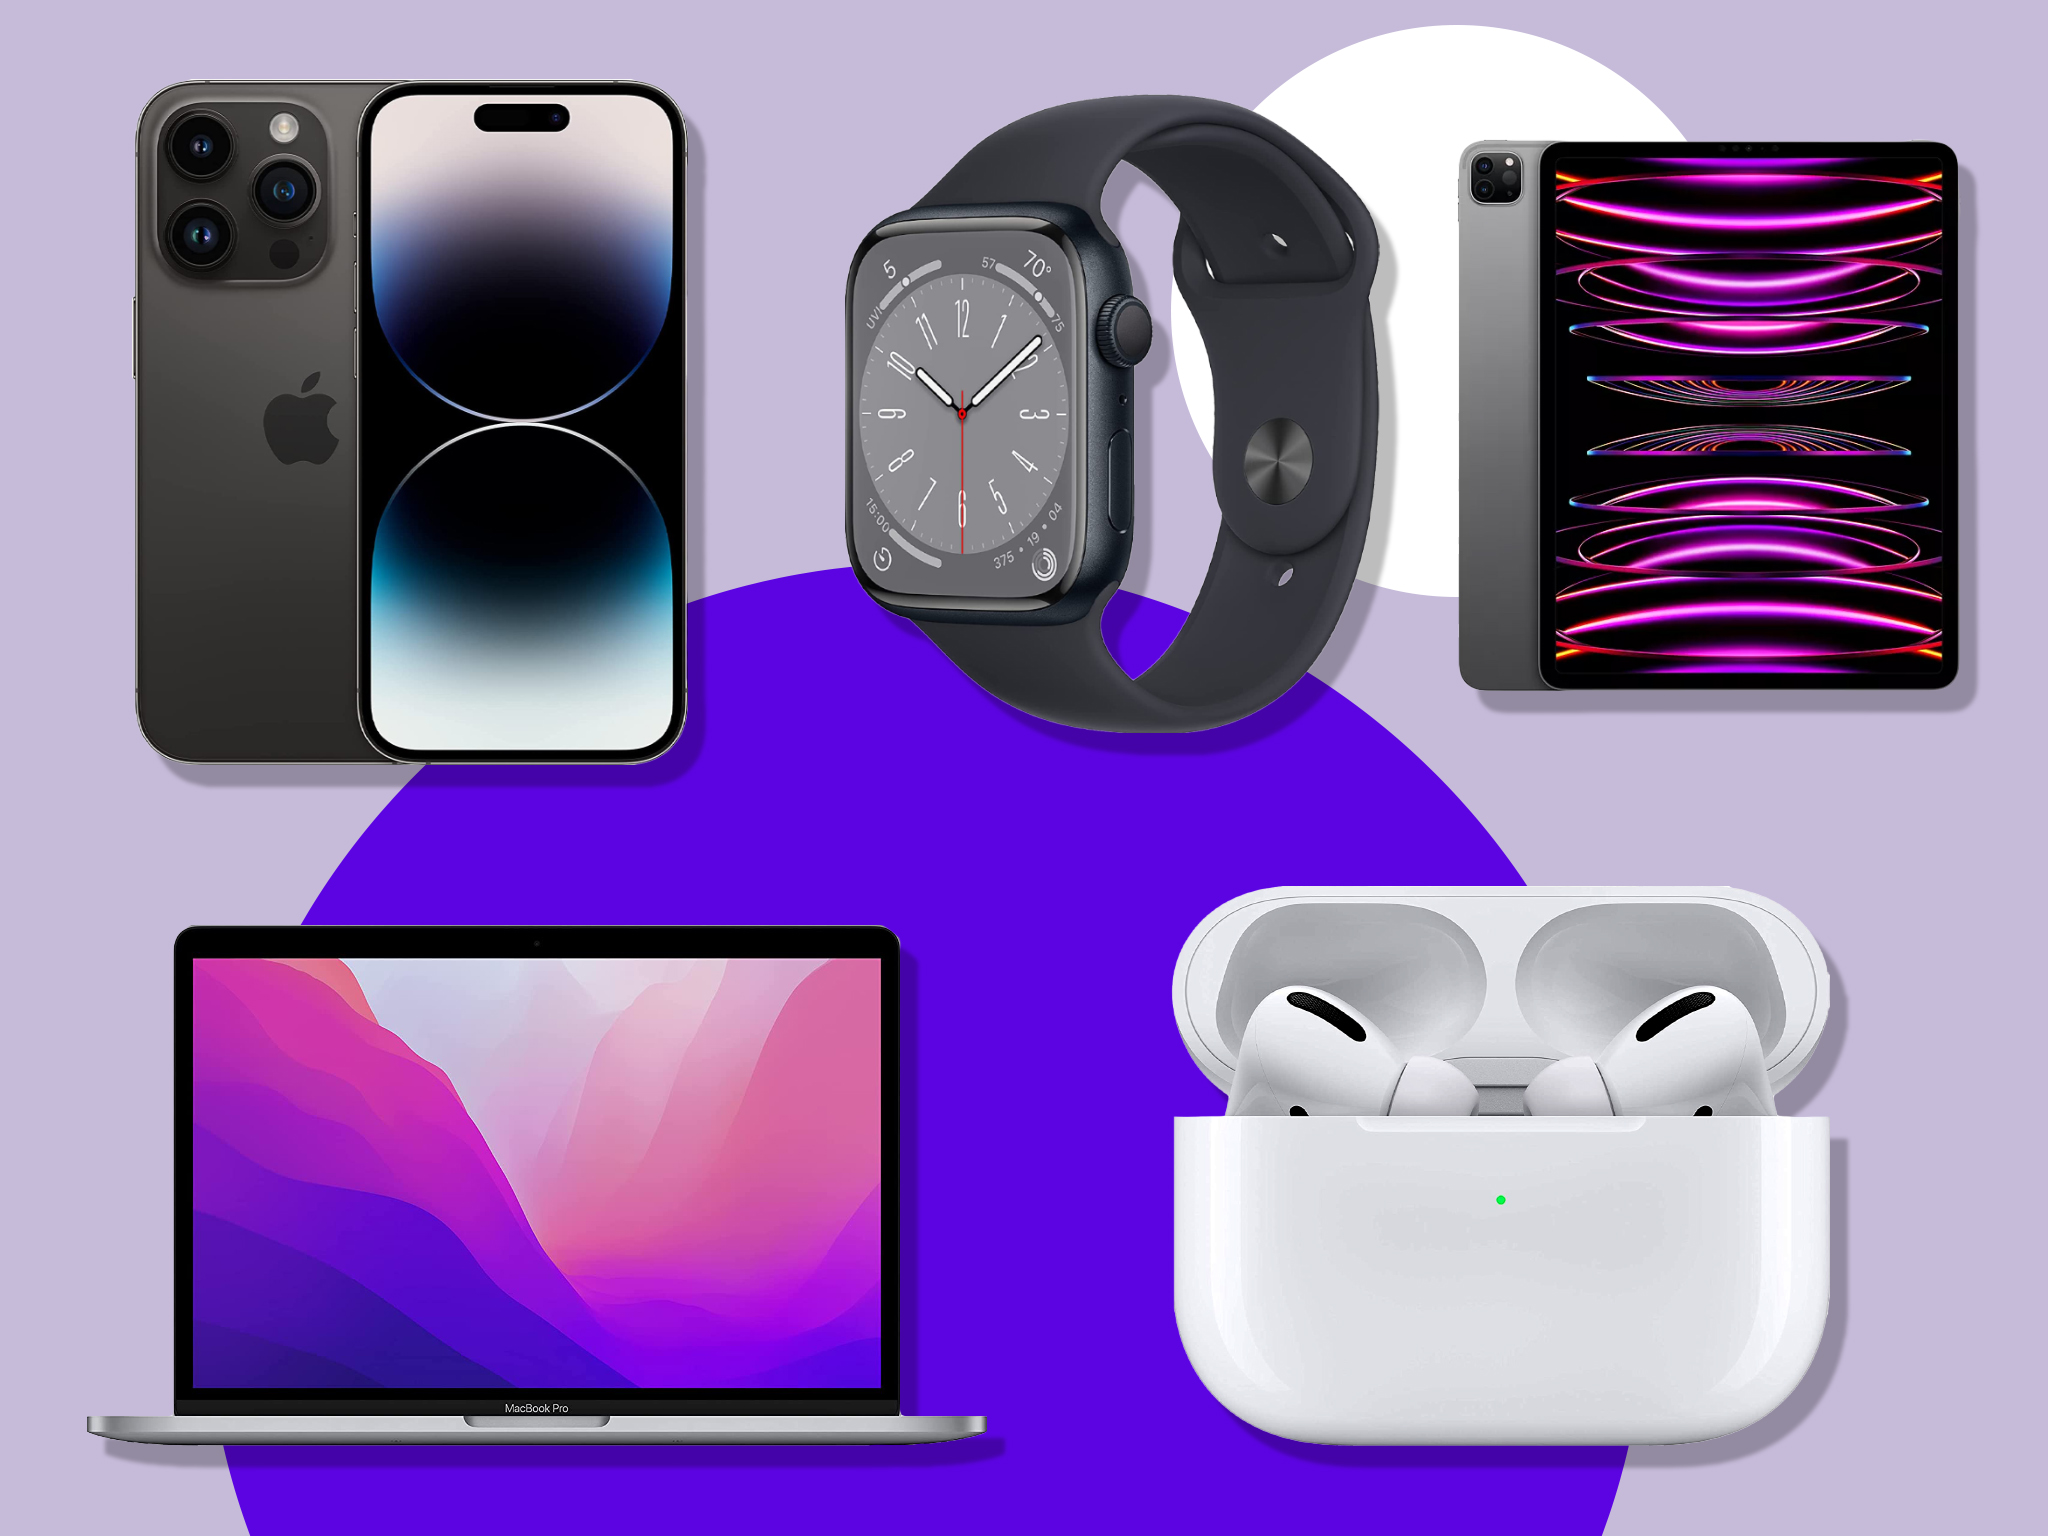 Apple Black Friday deals 2022: Best offers on iPads, iPhones, MacBooks and AirPods